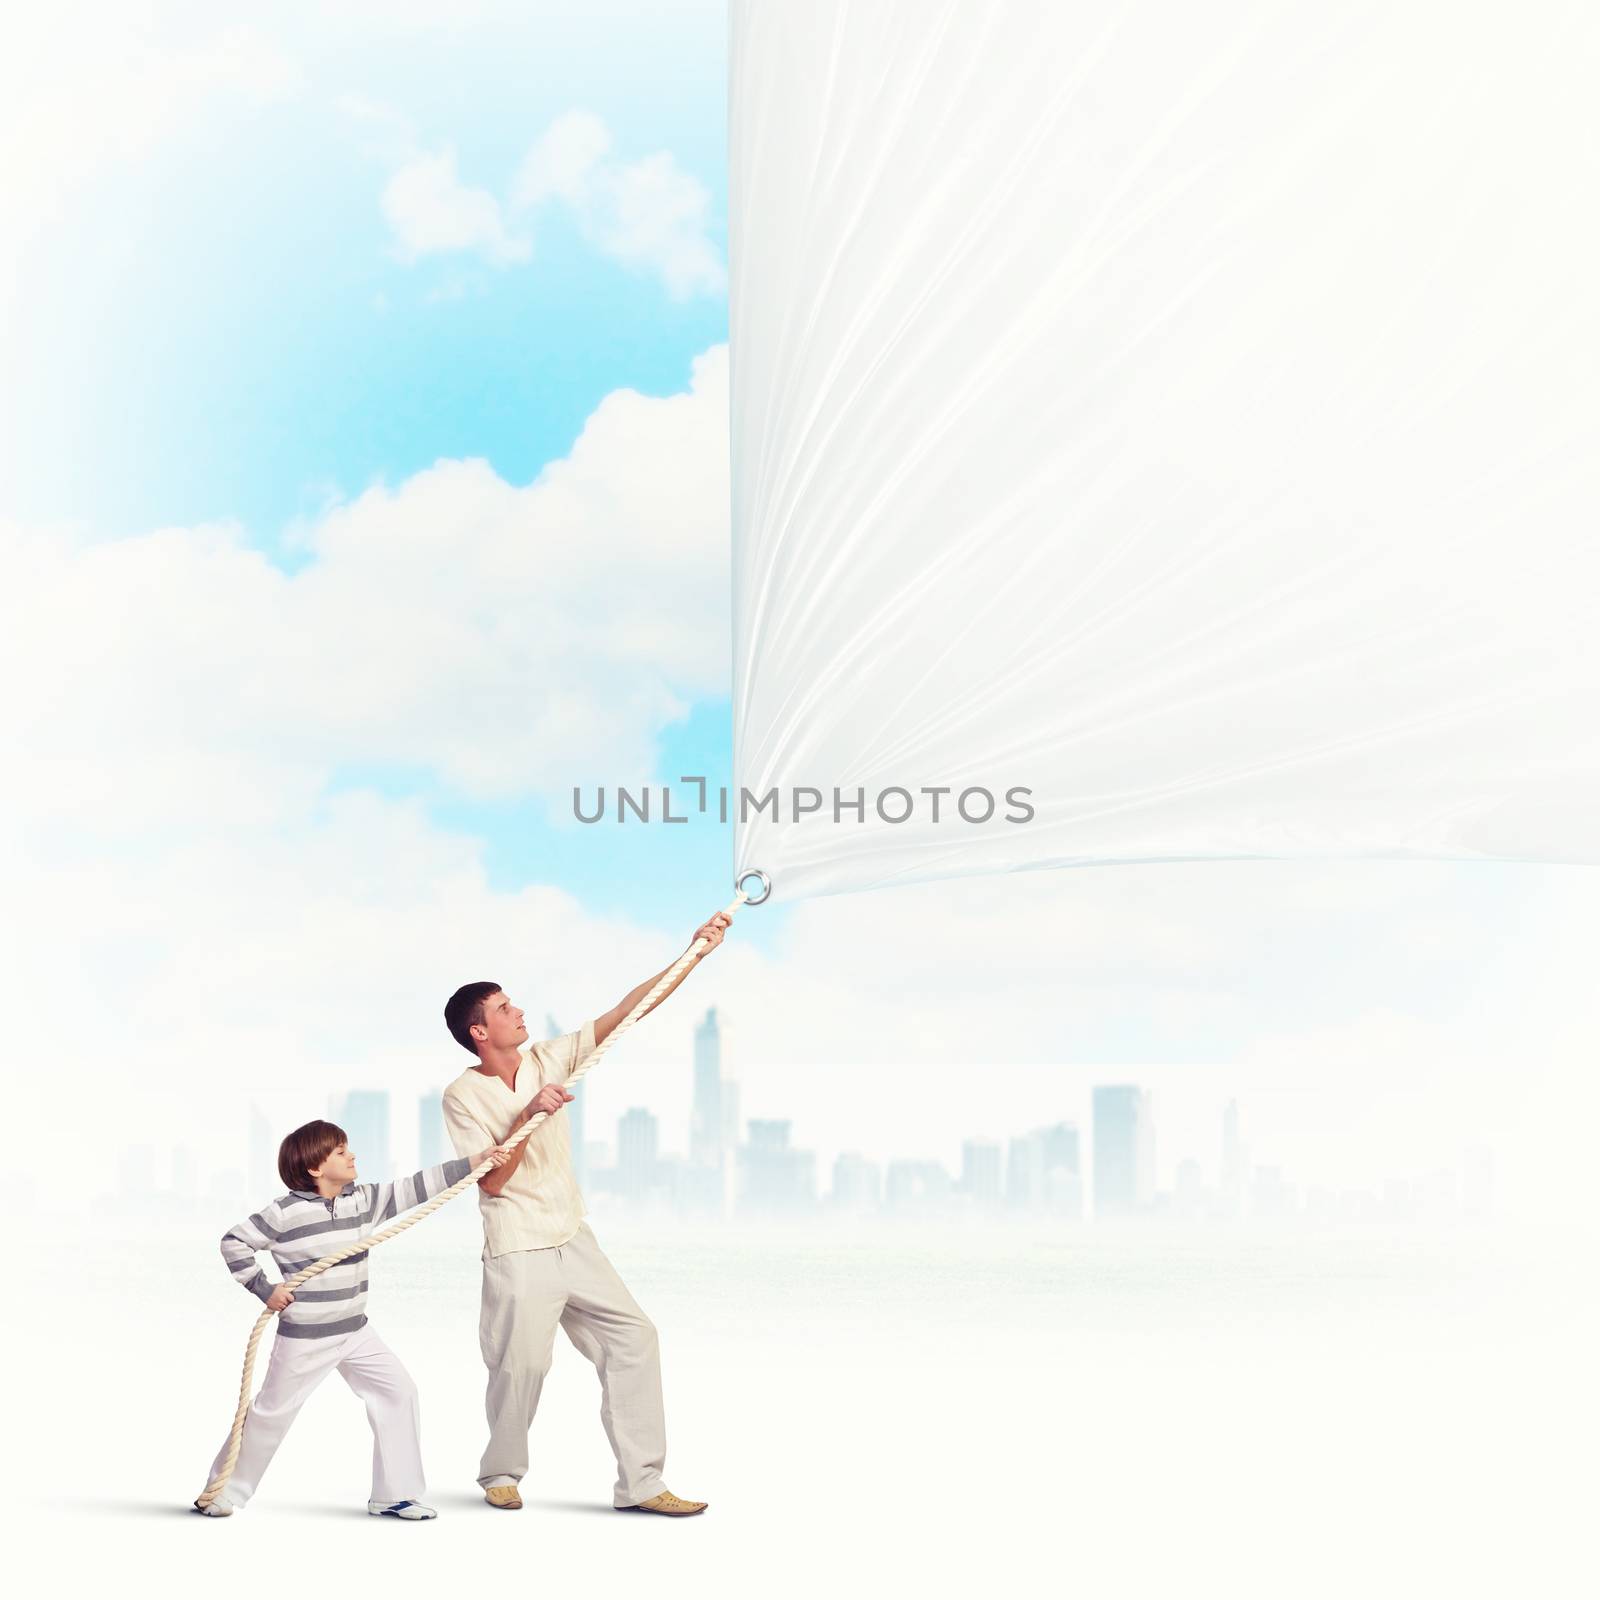 father and son pulling blank banner. Place for text